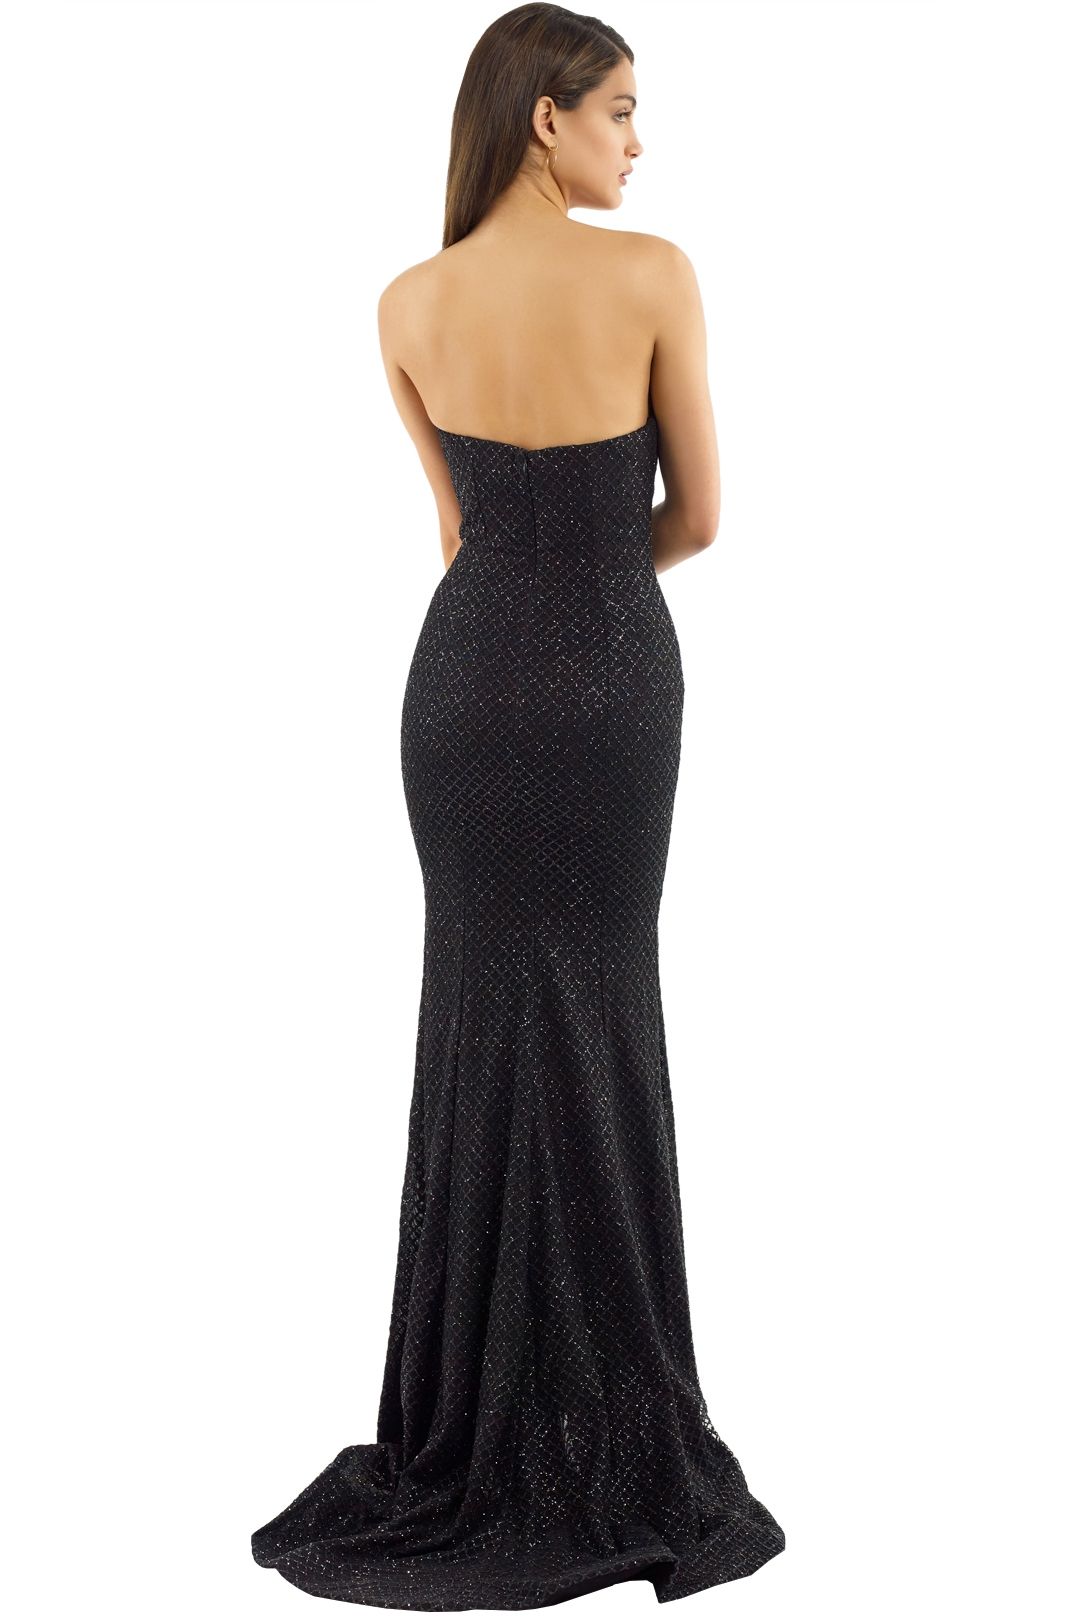 Portia and Scarlett - Tyra Gown - Black - Back